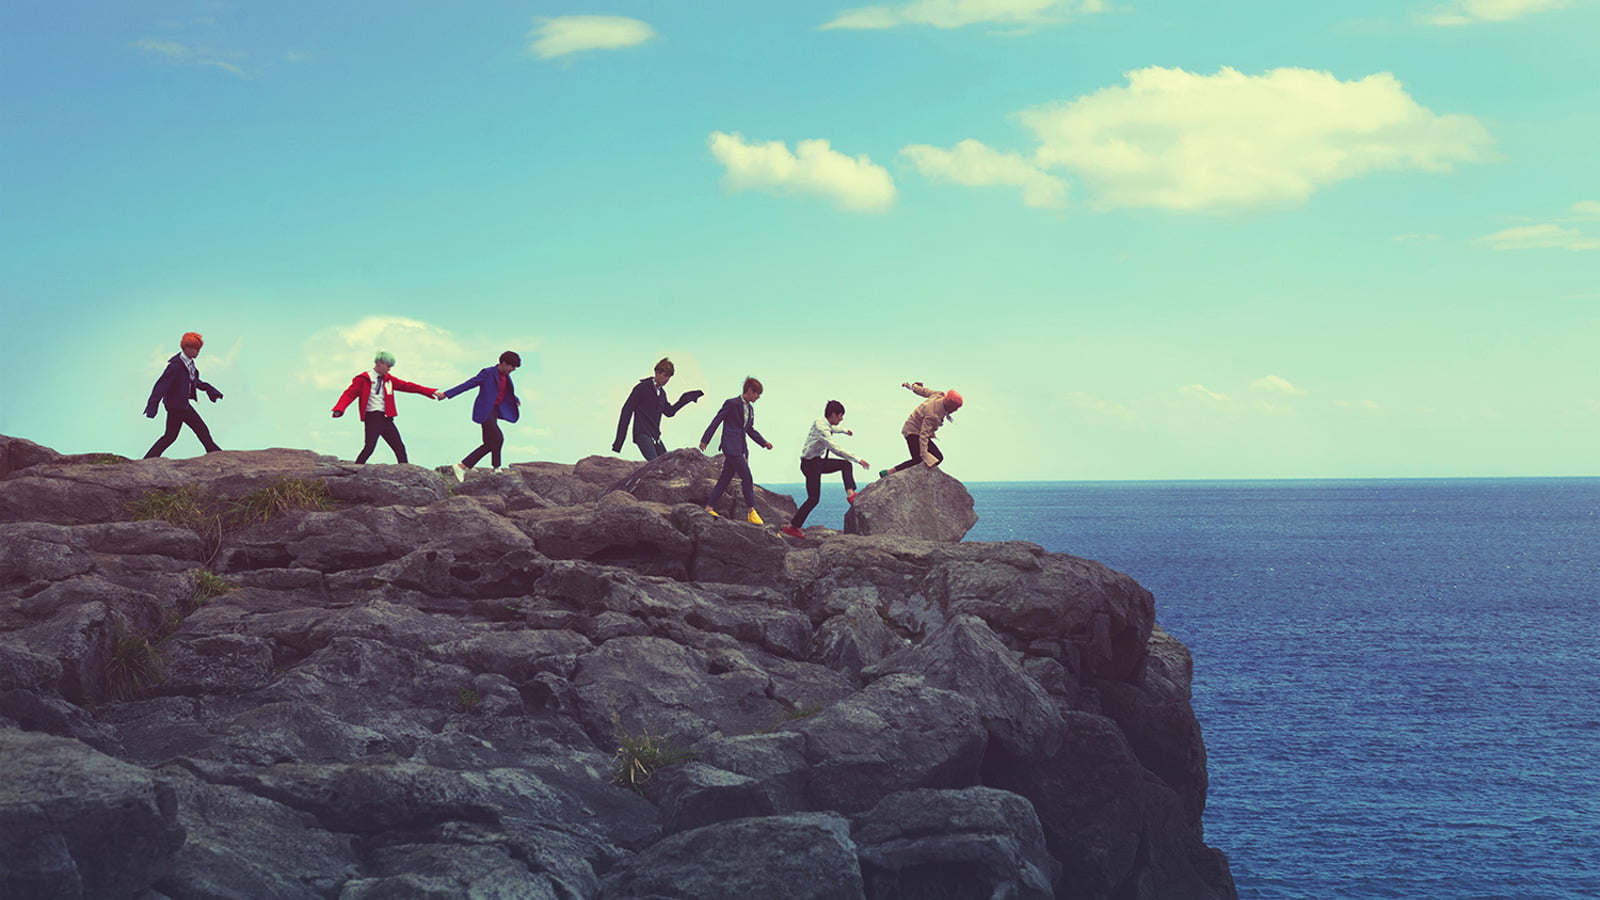 brown stone hill, Music, BTS, sky, sea, water, group of people